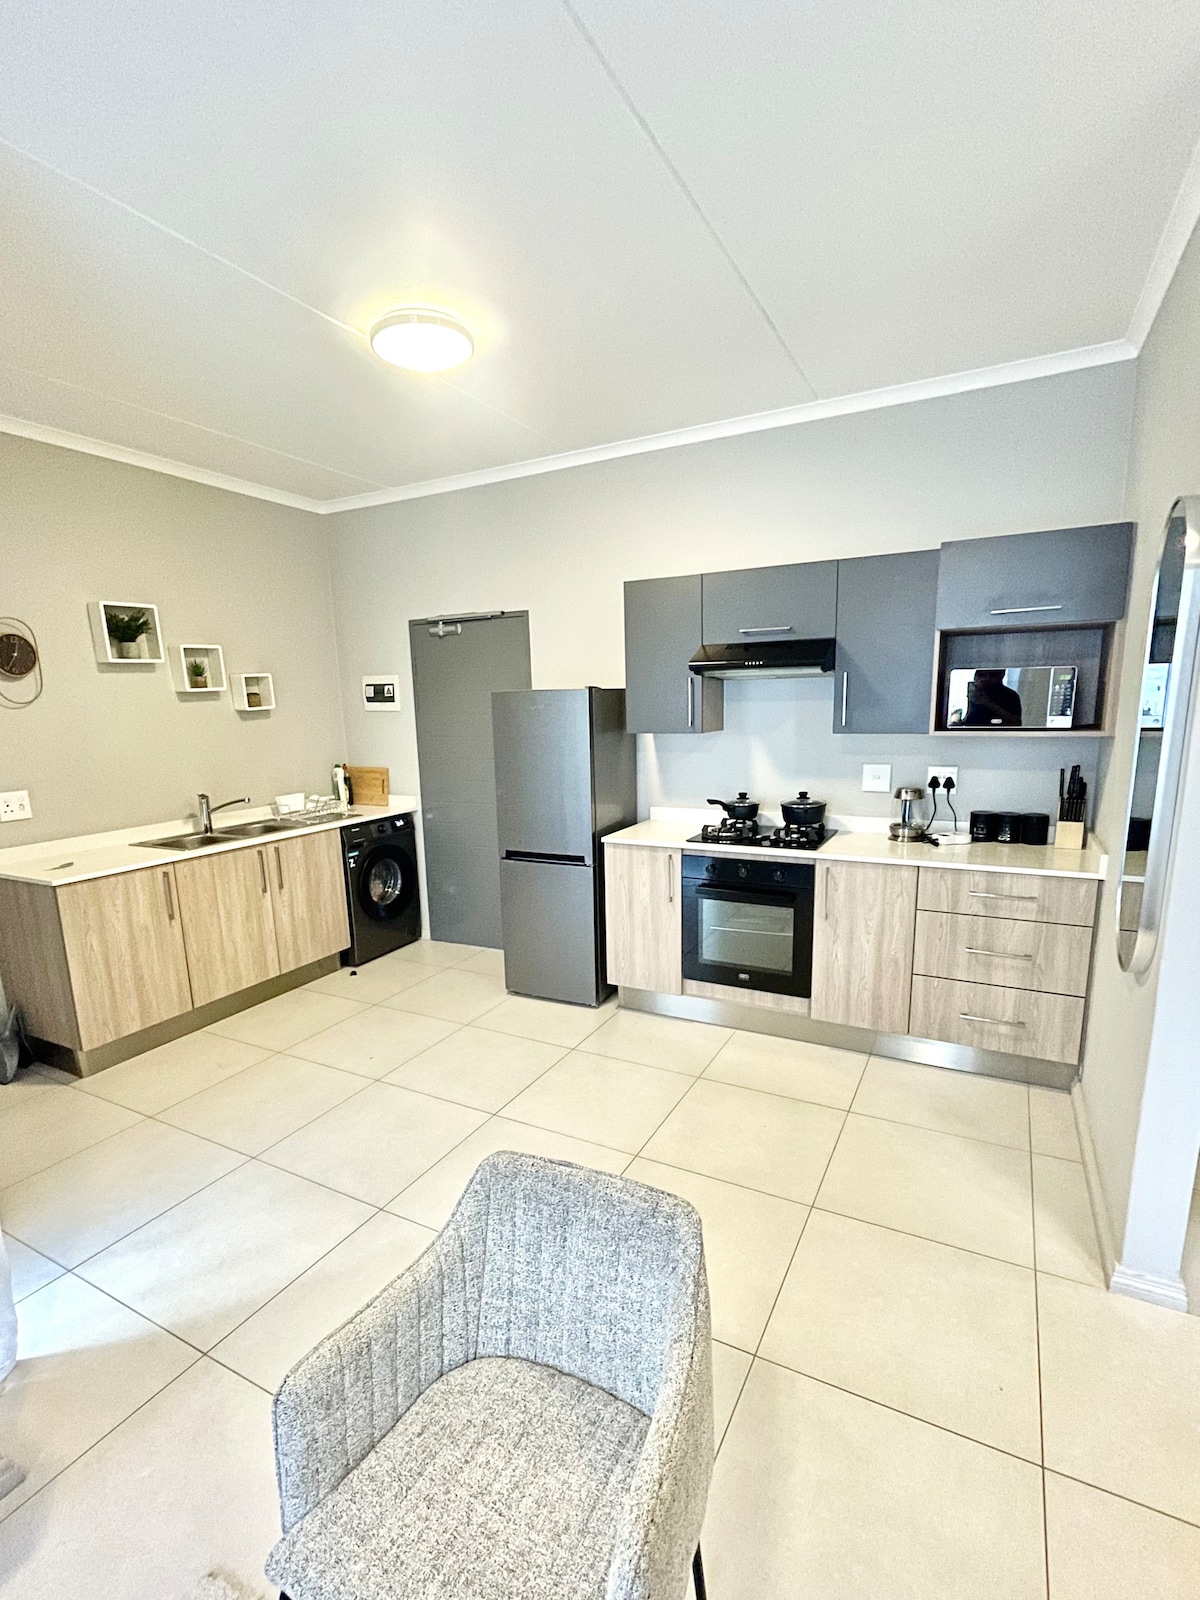 Apartment in midrand 50 on lever